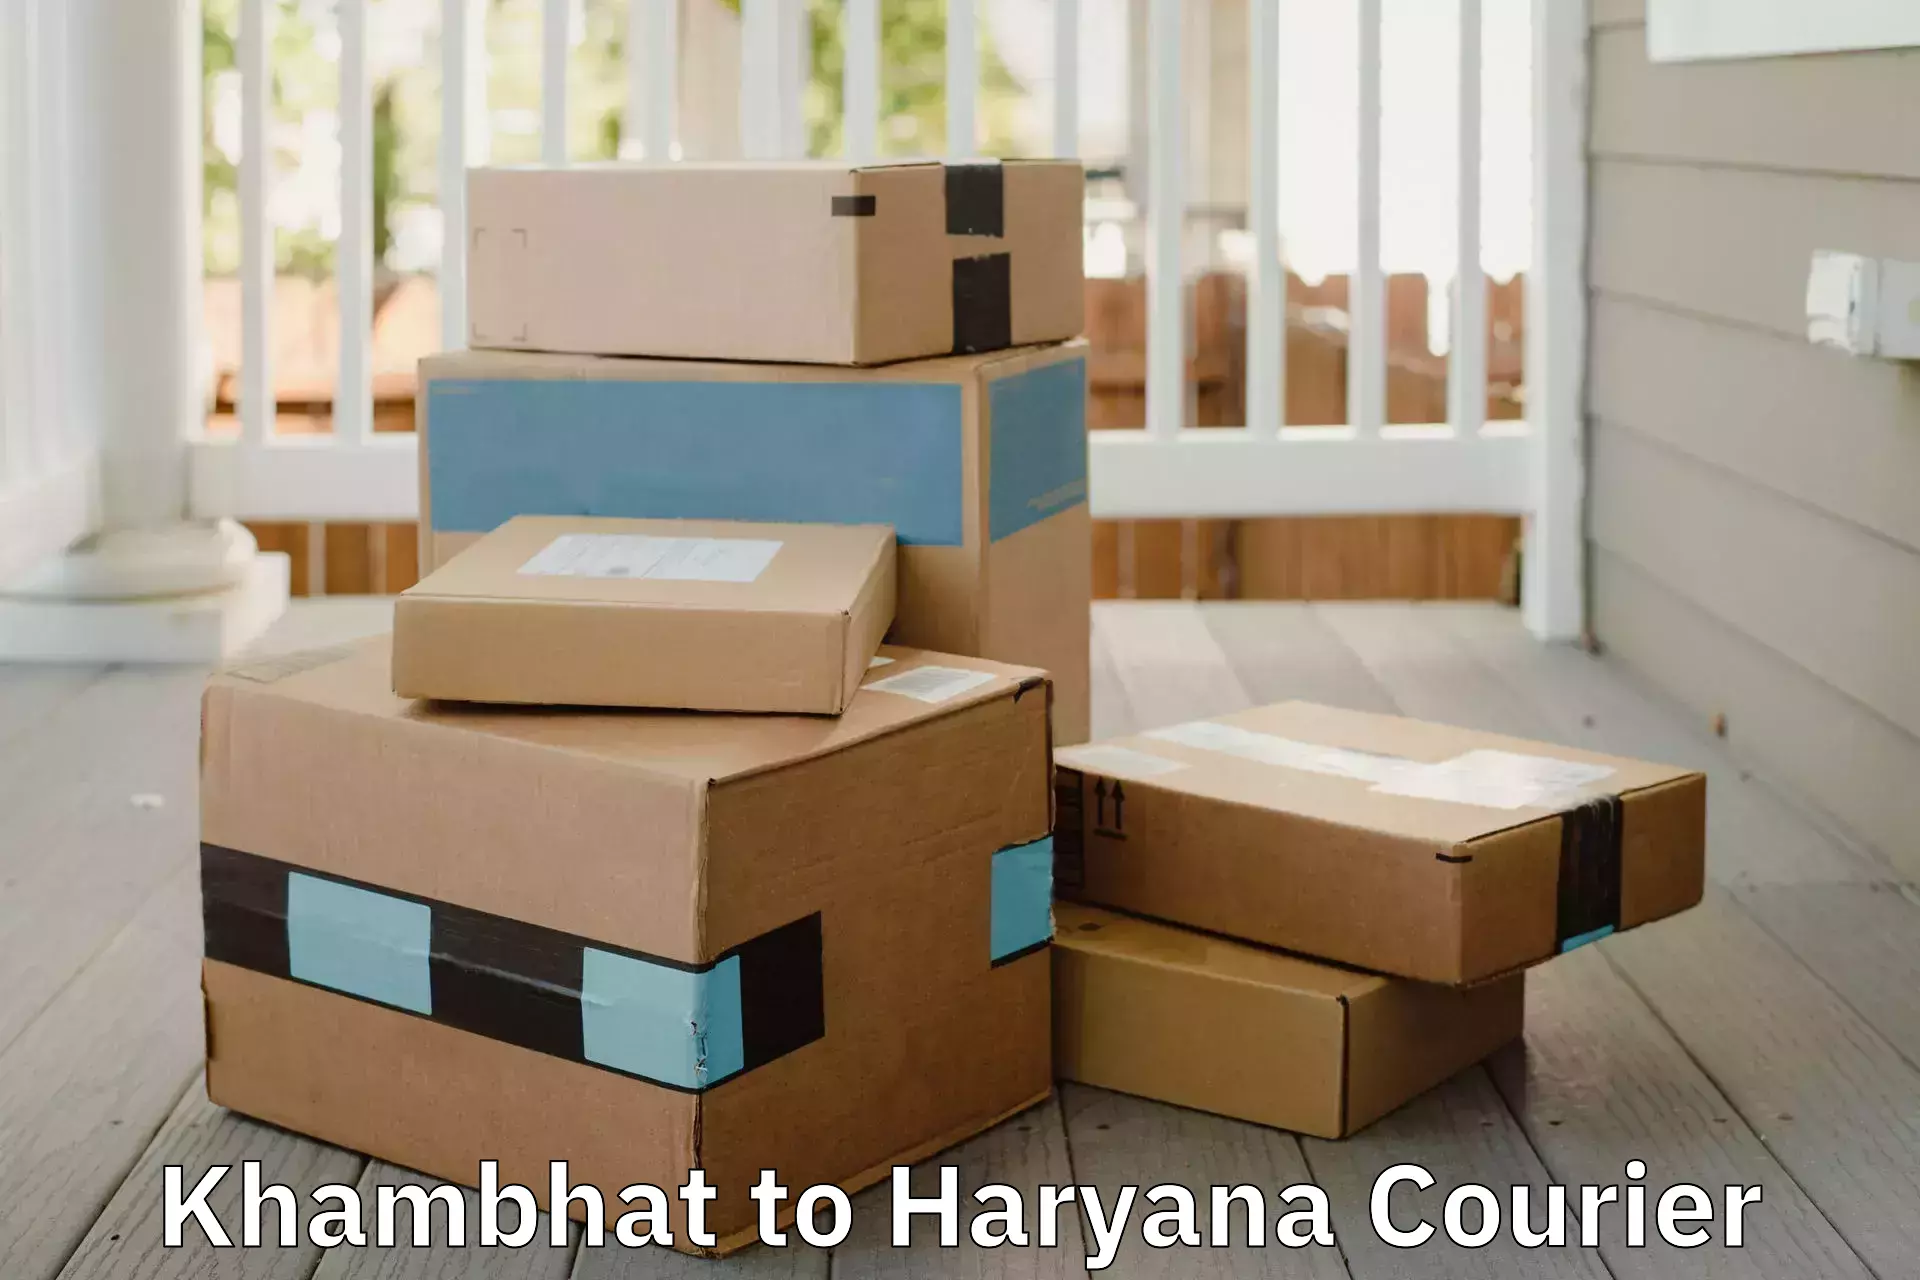 Quality relocation assistance Khambhat to NCR Haryana